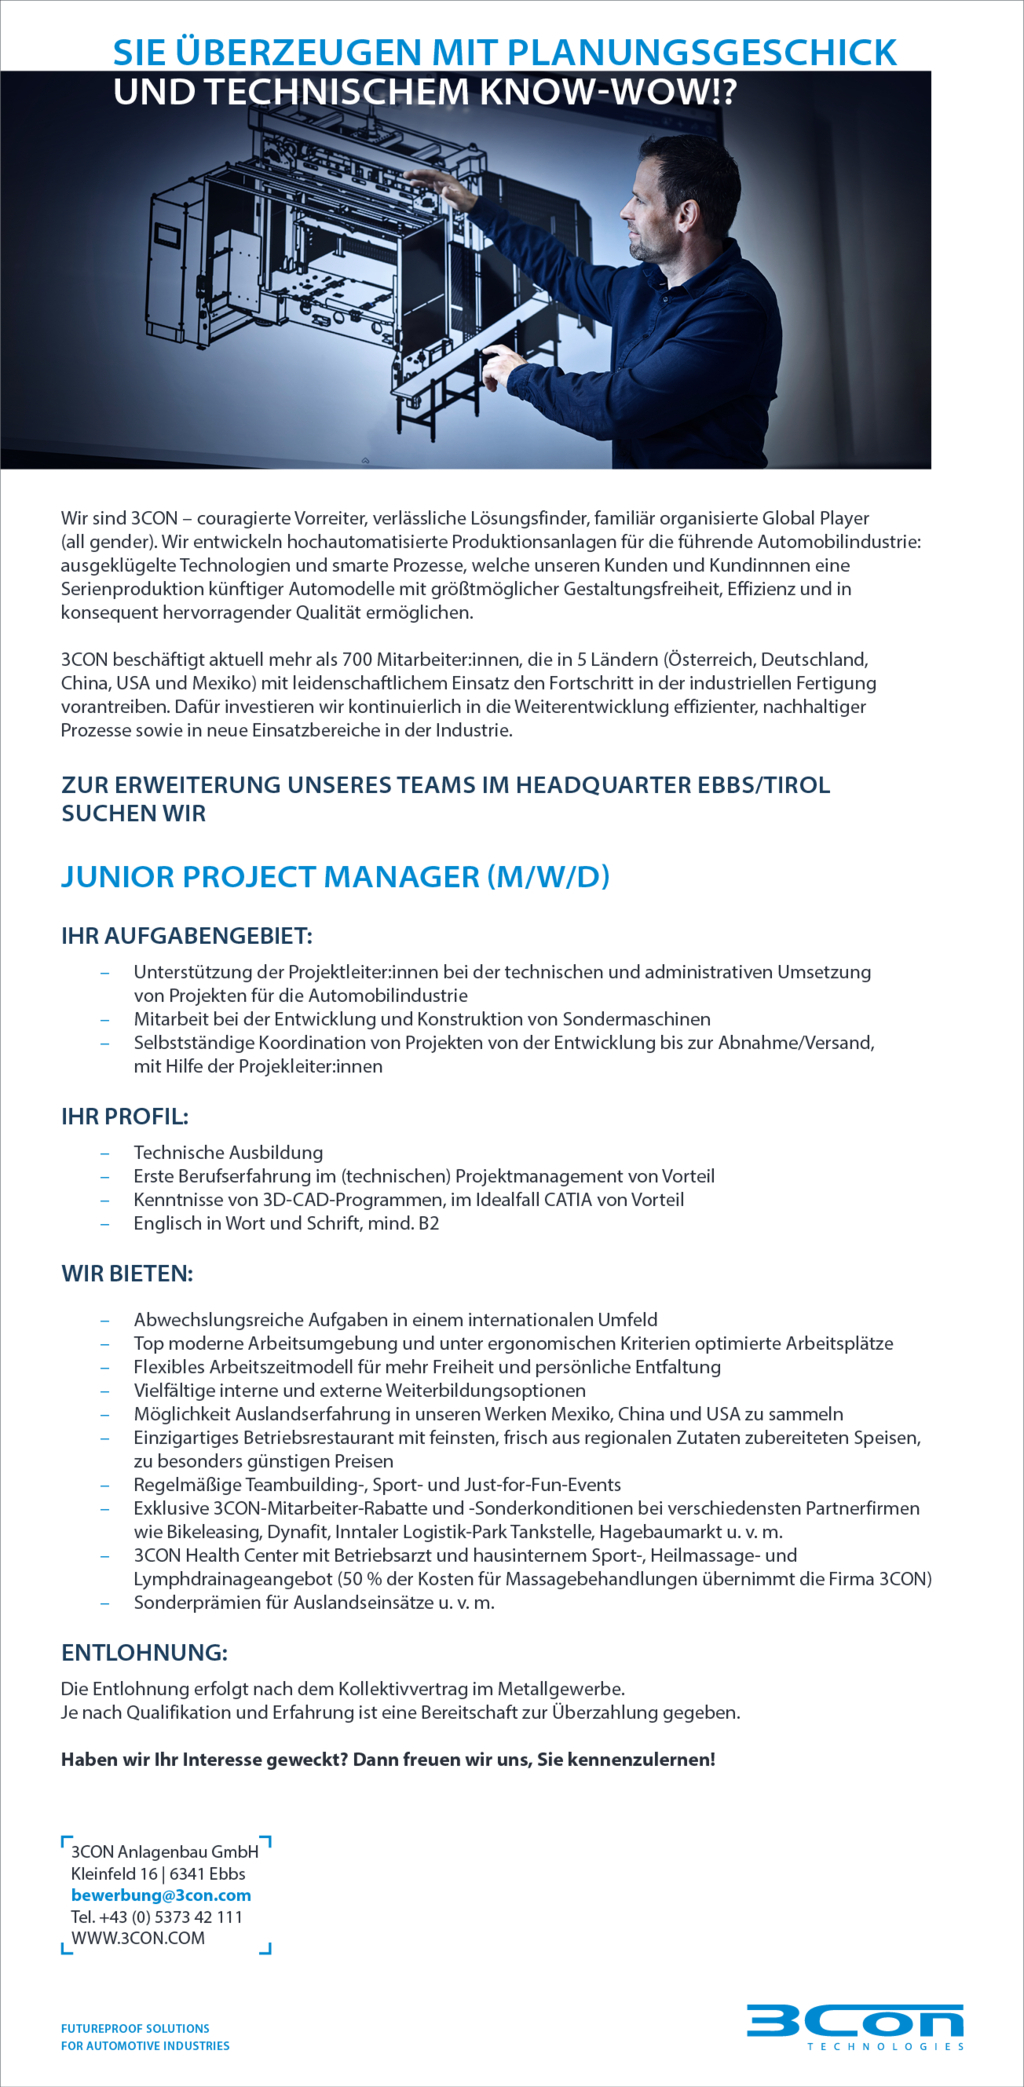 Junior Project Manager (M/W/D)